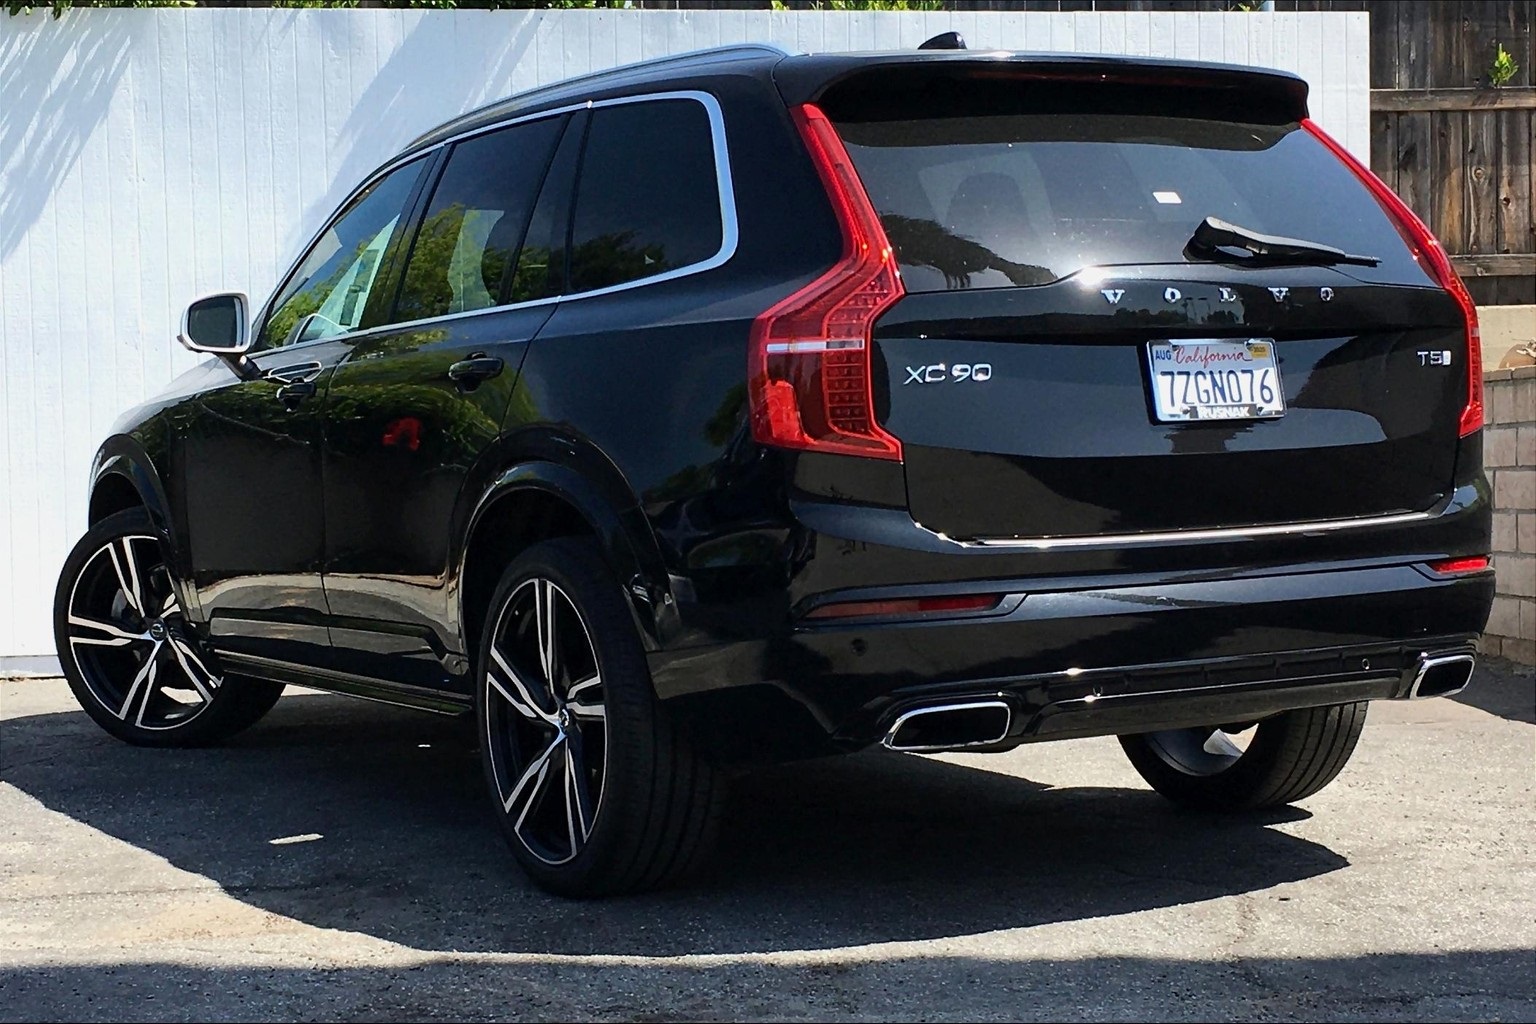 Certified PreOwned 2017 Volvo XC90 T5 RDesign 4D Sport